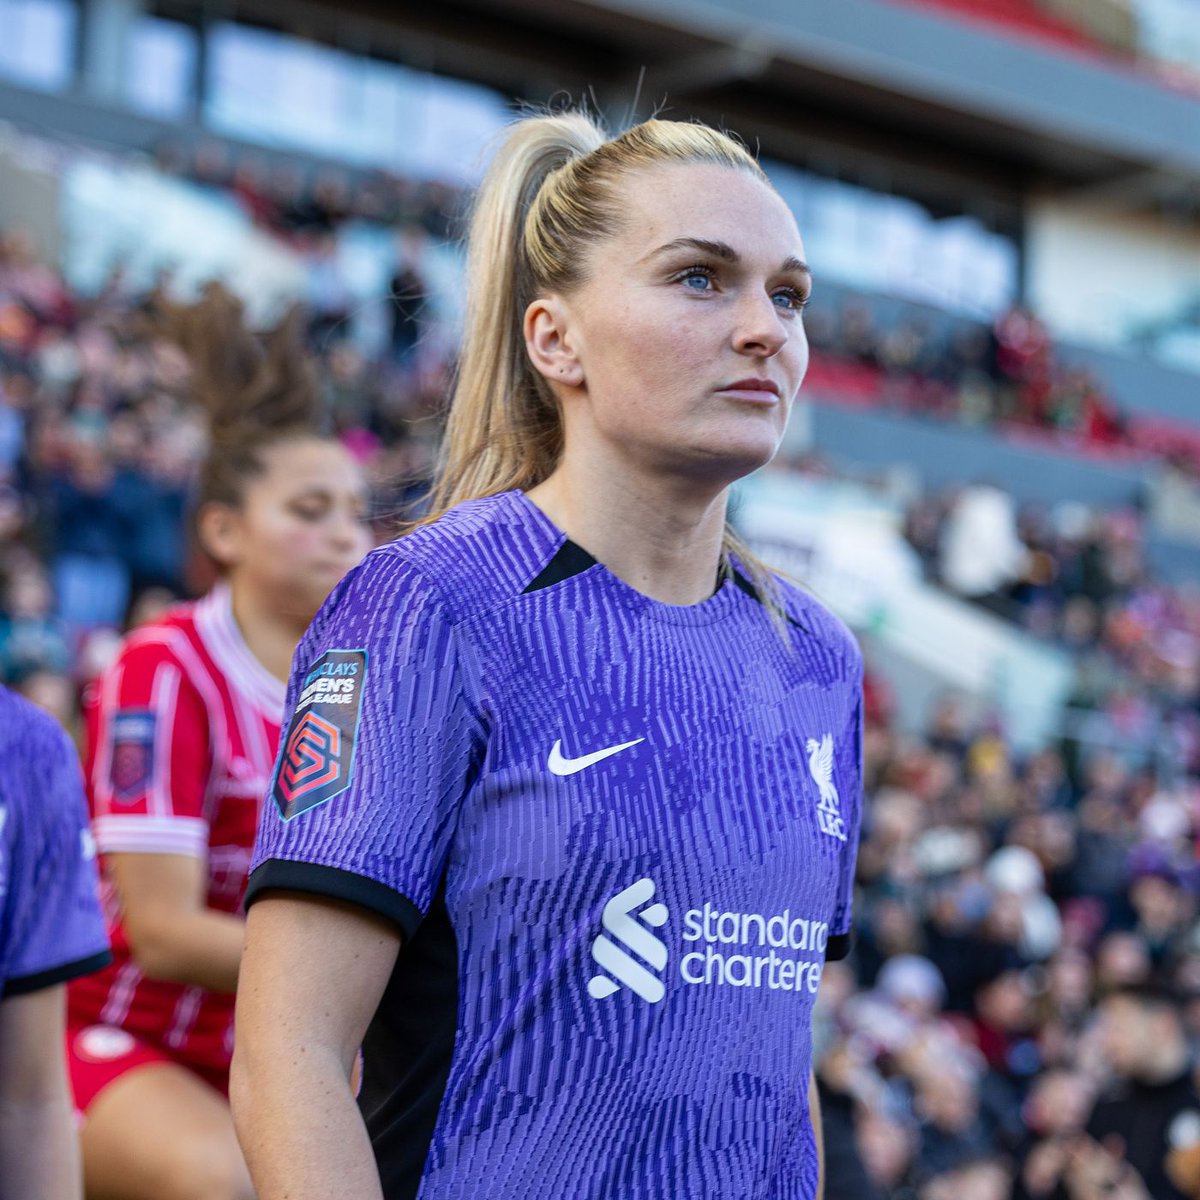 After 5 wonderful years as a Red, magician Melissa Lawley is departing. 
All of us want to thank Mel for her commitment to the Reds, particularly for her role in securing promotion back to the WSL👊
Those silky skills will be greatly missed by all.
Best of luck in the future,Mel.